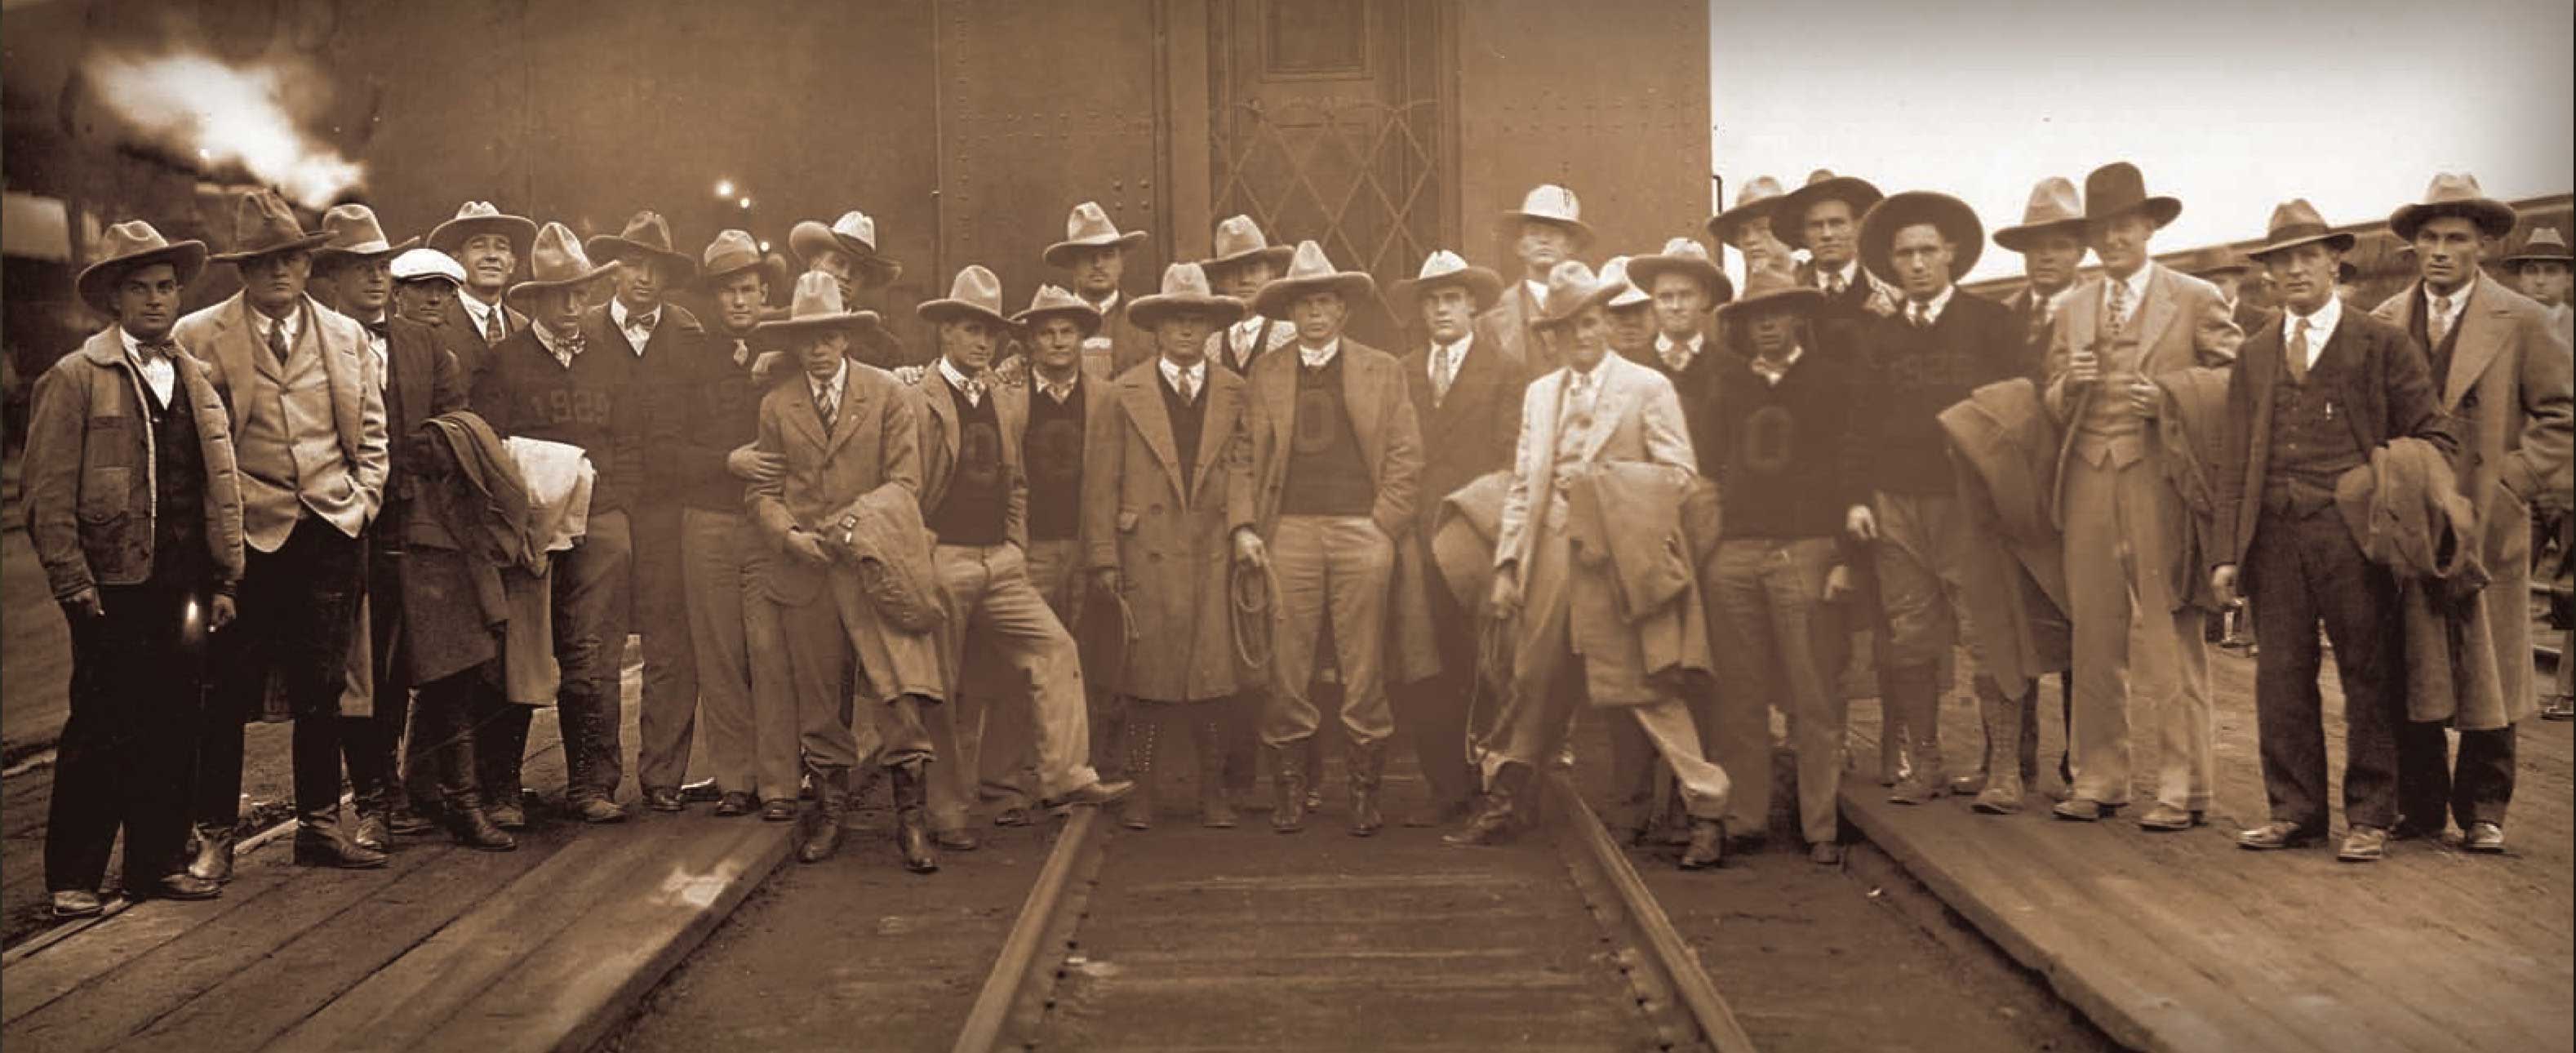 Coach John Maulbetsch’s OAMC football teamed traveled to Ann Arbor, Michigan, in 1926 and stopped to pose at a train station in route. Known for their cowboy hats and boots their opponent’s sports reporters frequently would write that “the cowboys were coming to town” when playing OAMC teams.